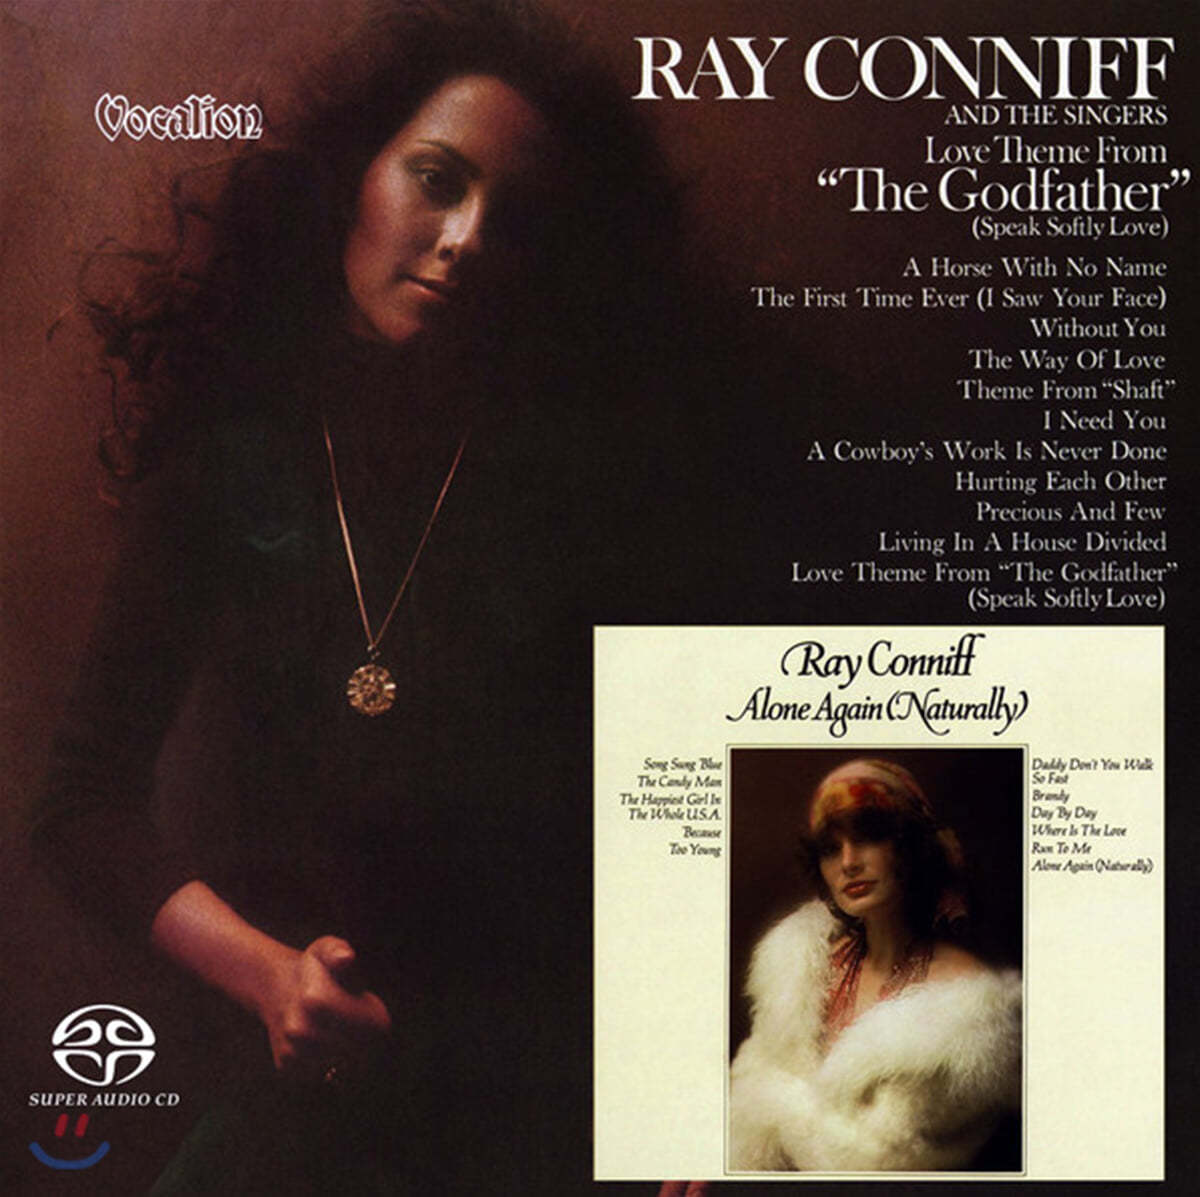 Ray Conniff &amp; The Singers (레이 카니프 앤 더 싱어즈) - Alone Again (Naturally) &amp; Love Theme from The Godfather (Speak Softly Love)